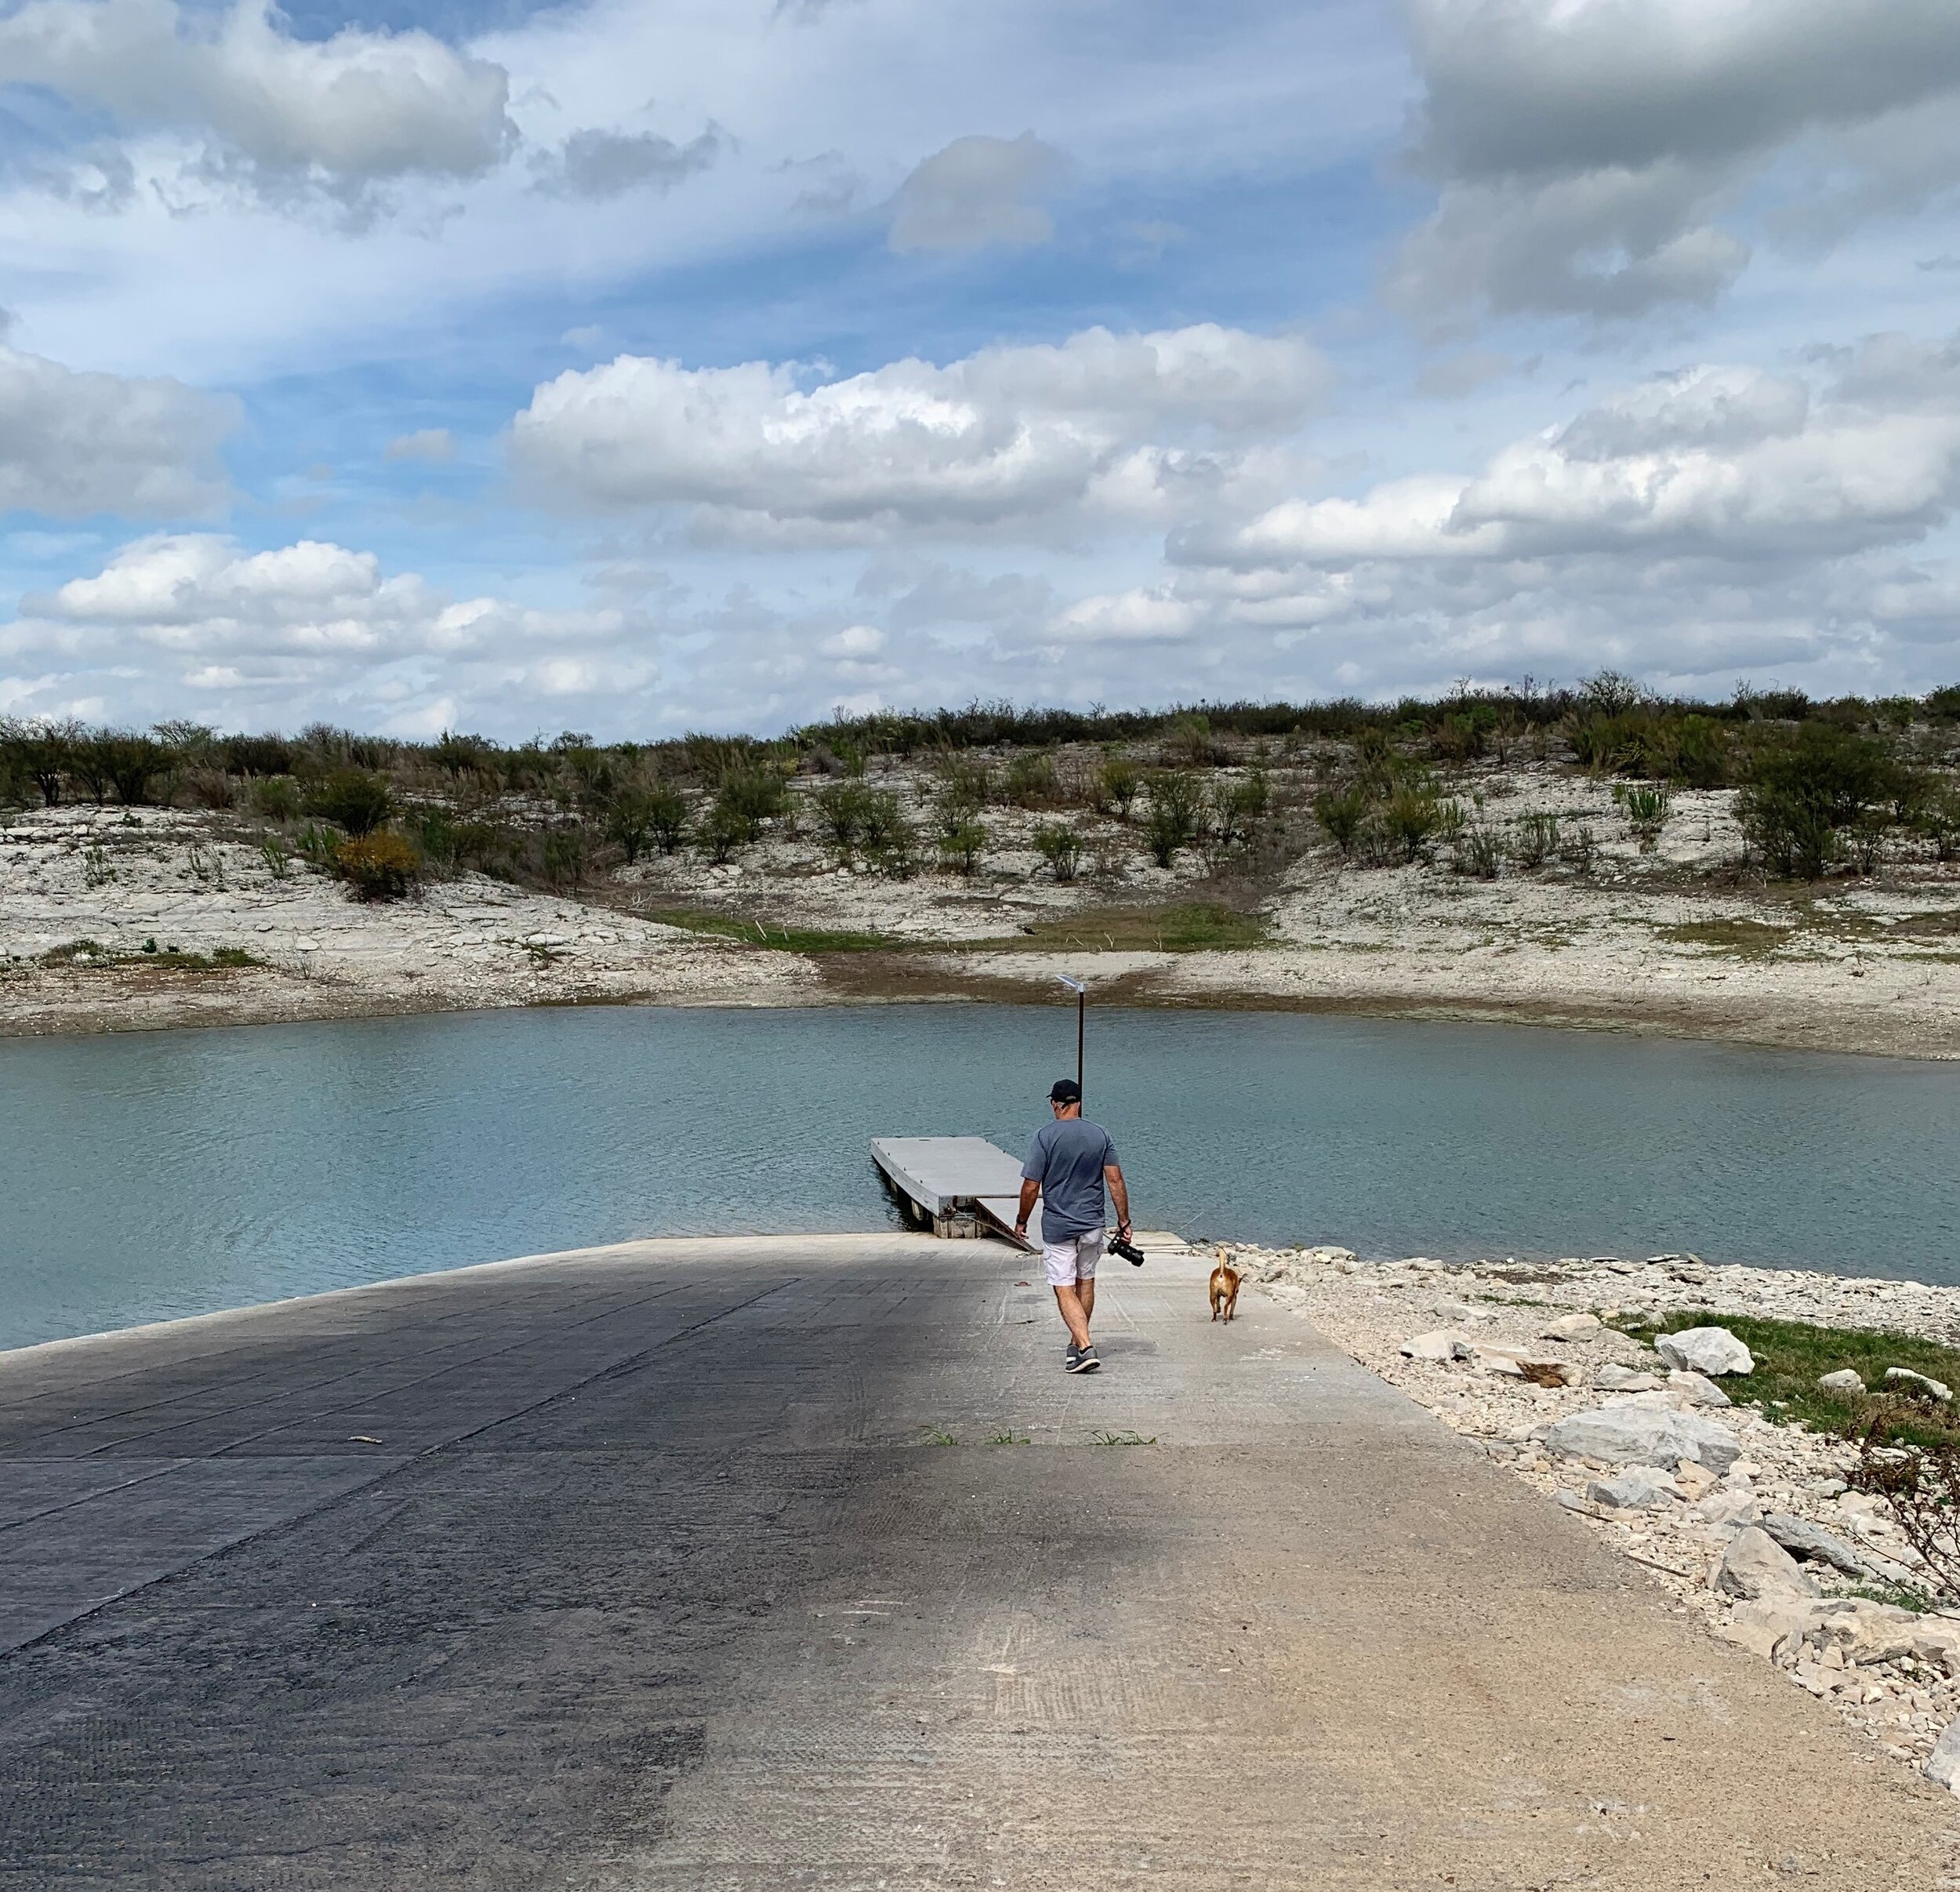  Once in Del Rio, TX we took a short drive to check out the area and found ourselves at Amistad National Recreational Area. This body of water is a beautiful blue and feeds into the Rio Grande, which defines the border of Mexico and the United States